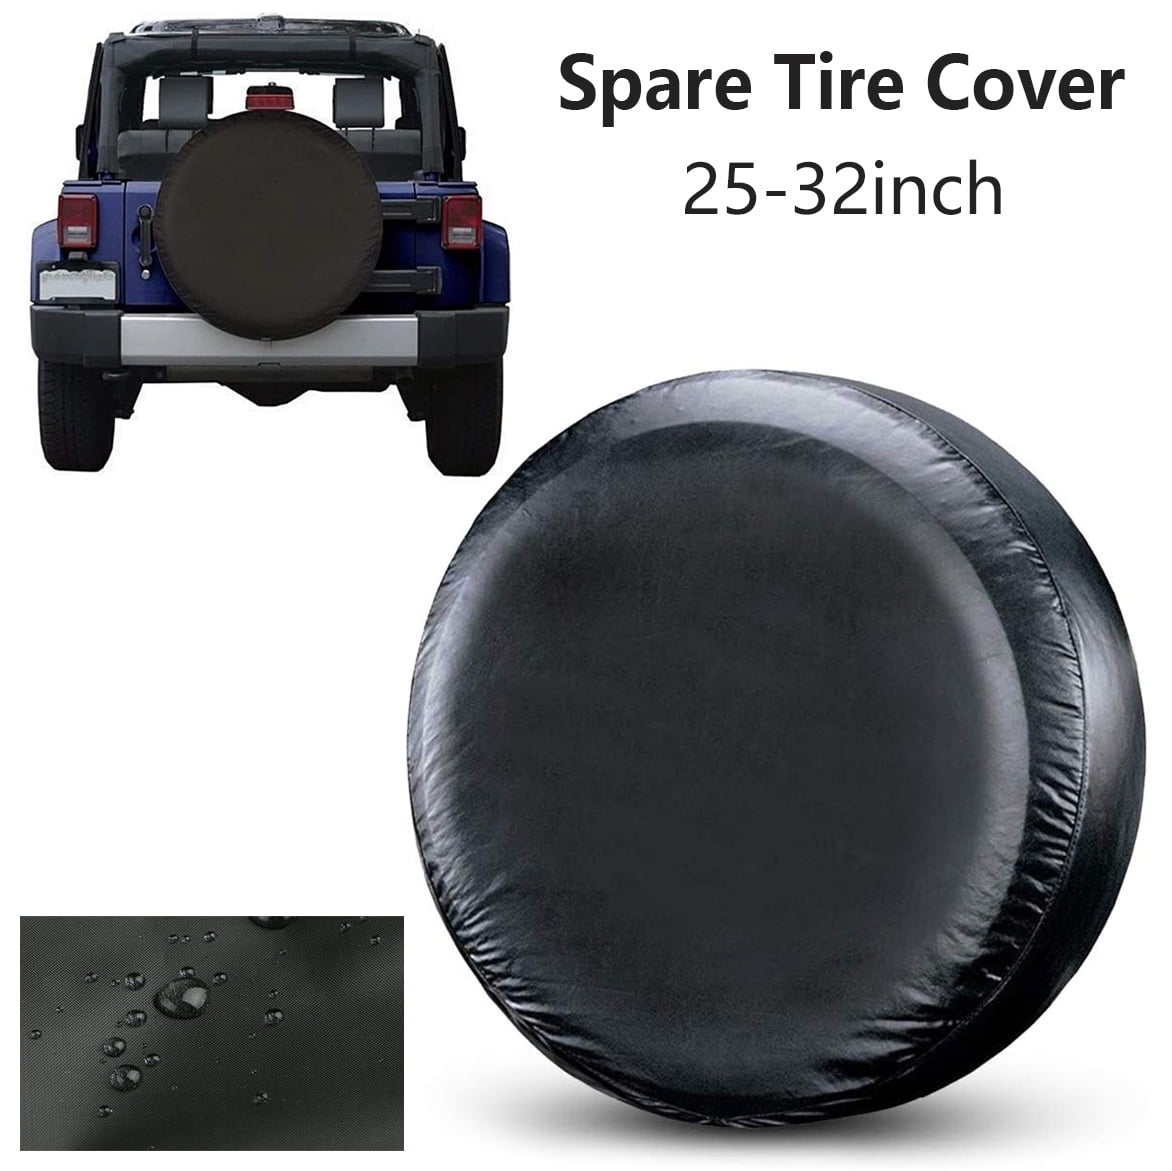 Set of 4 Tire Wheel Cover fits 24.5"-27.5" tires for RV Trailers Truck Van SUV 